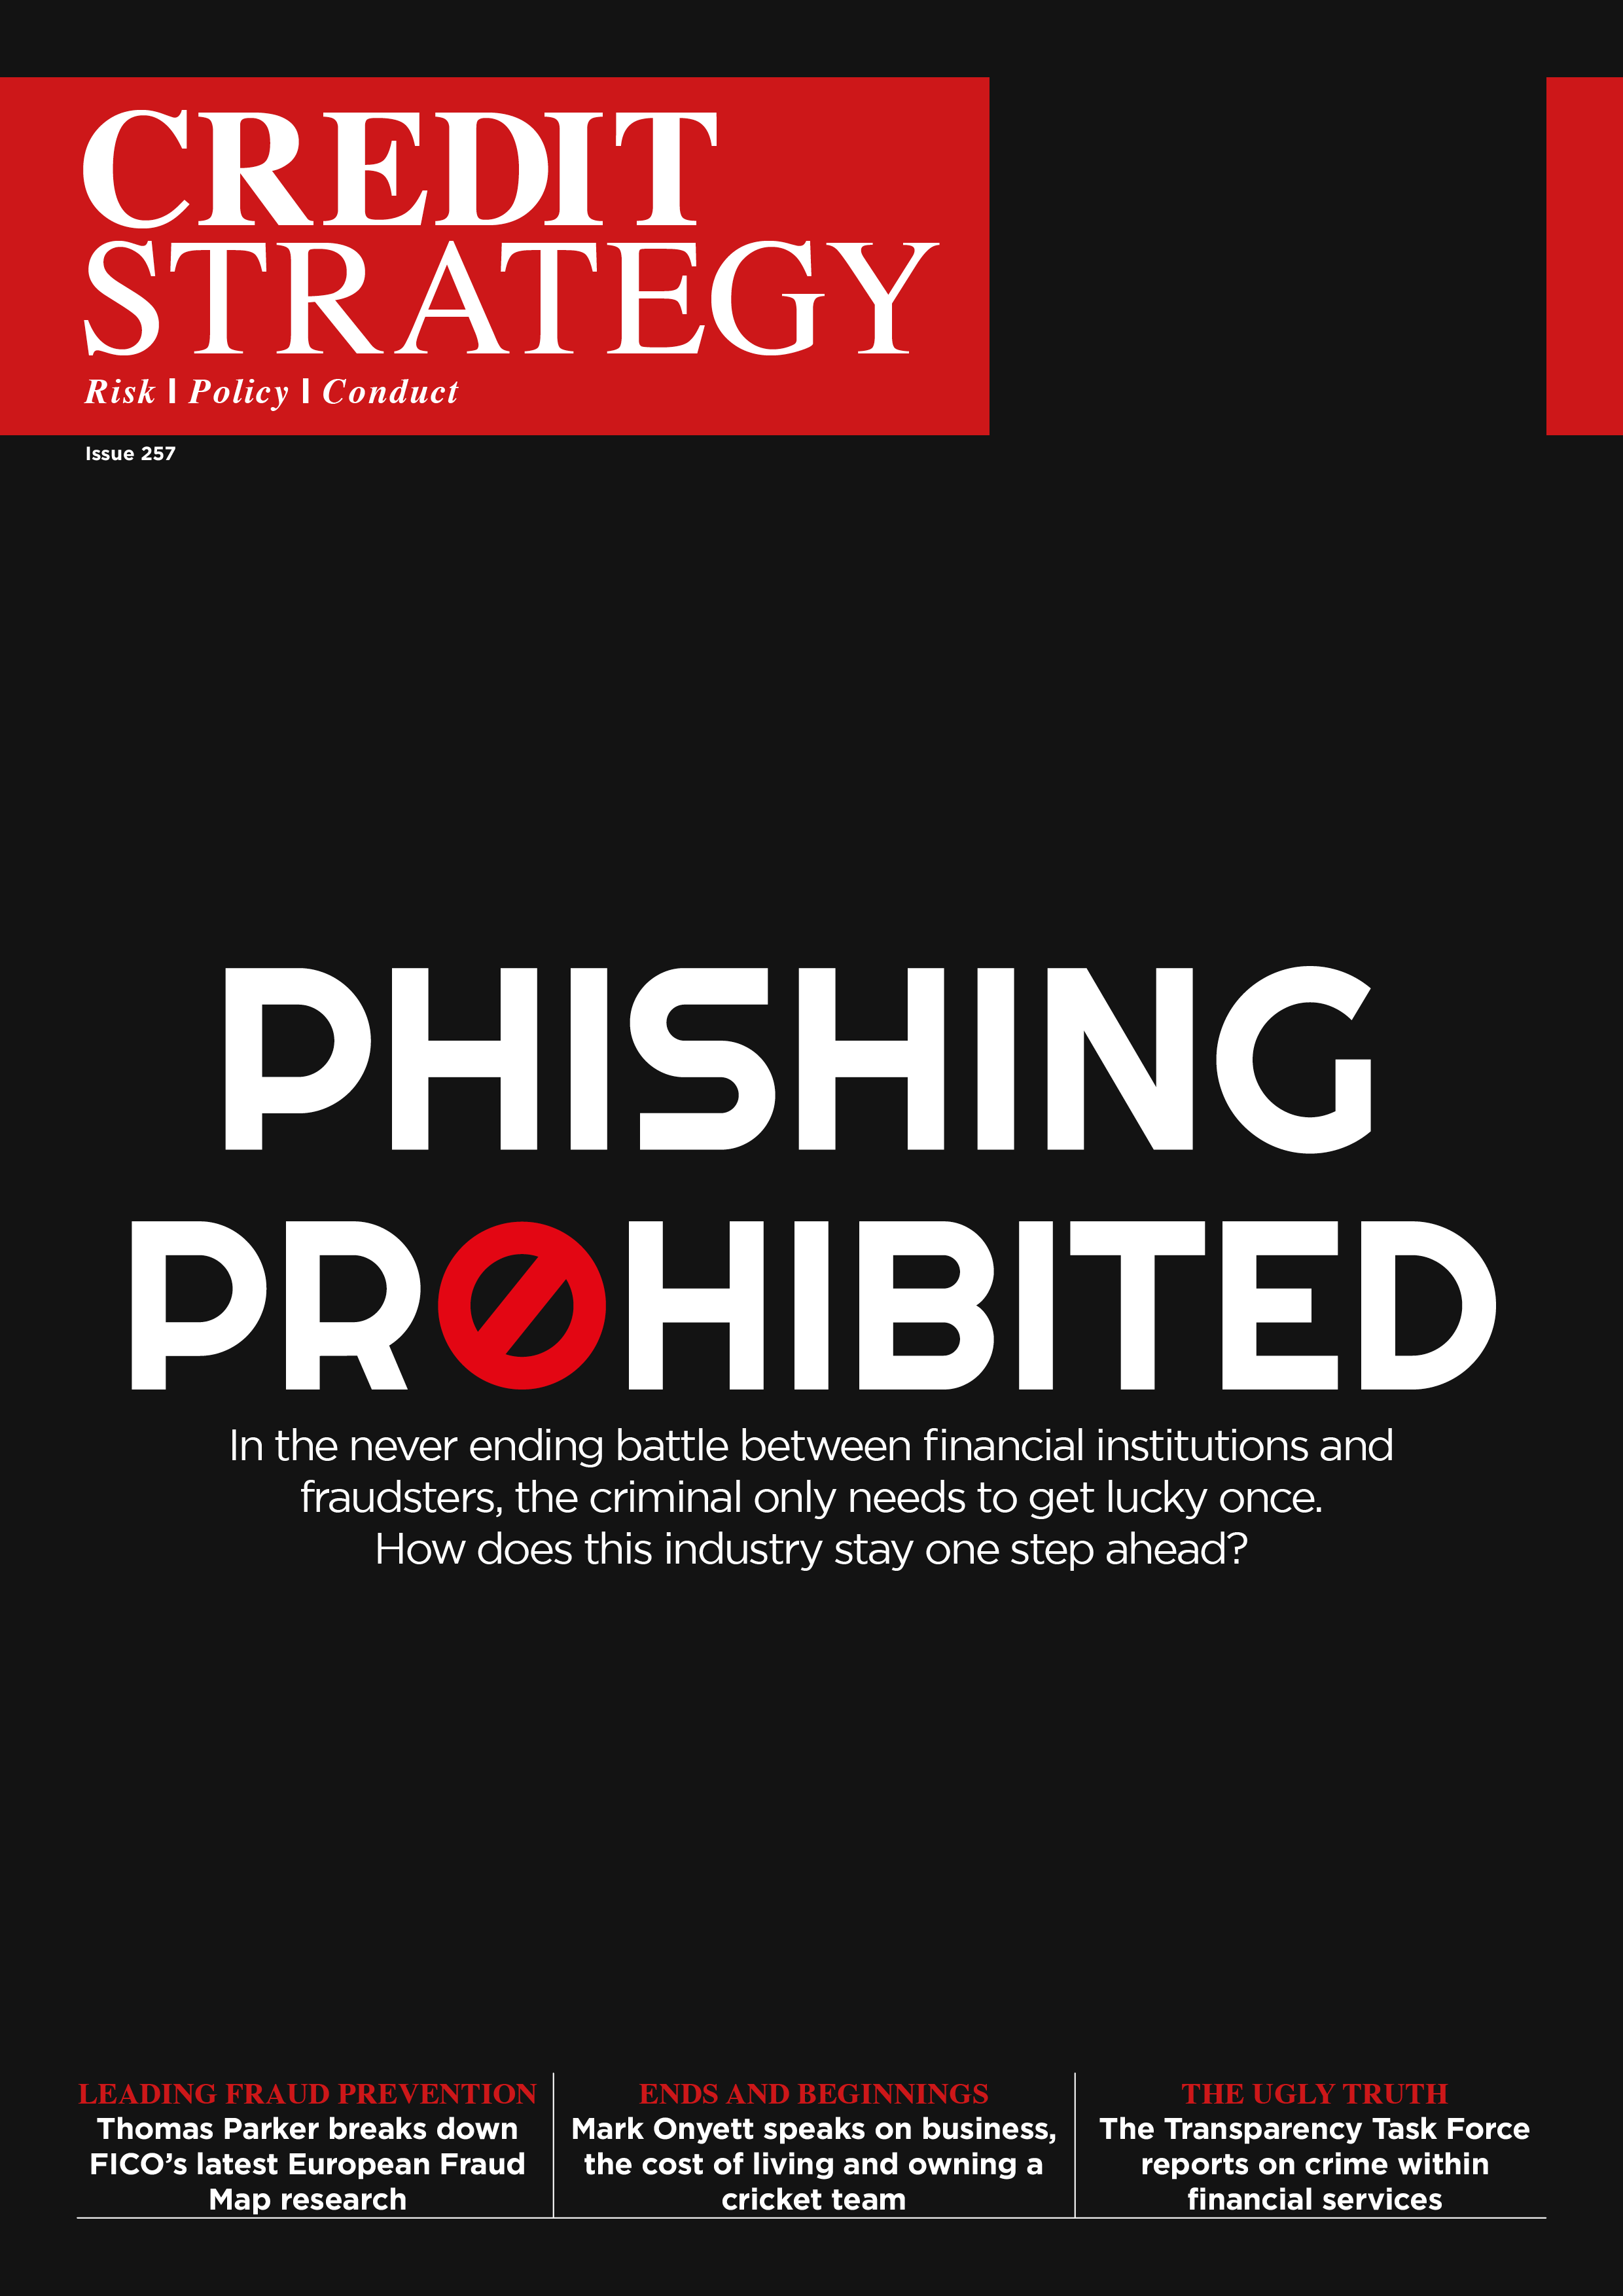 Phishing Prohibited: In the never ending battle between financial institutions and fraudsters, the criminal only needs to get lucky once. How does this industry stay one step ahead?